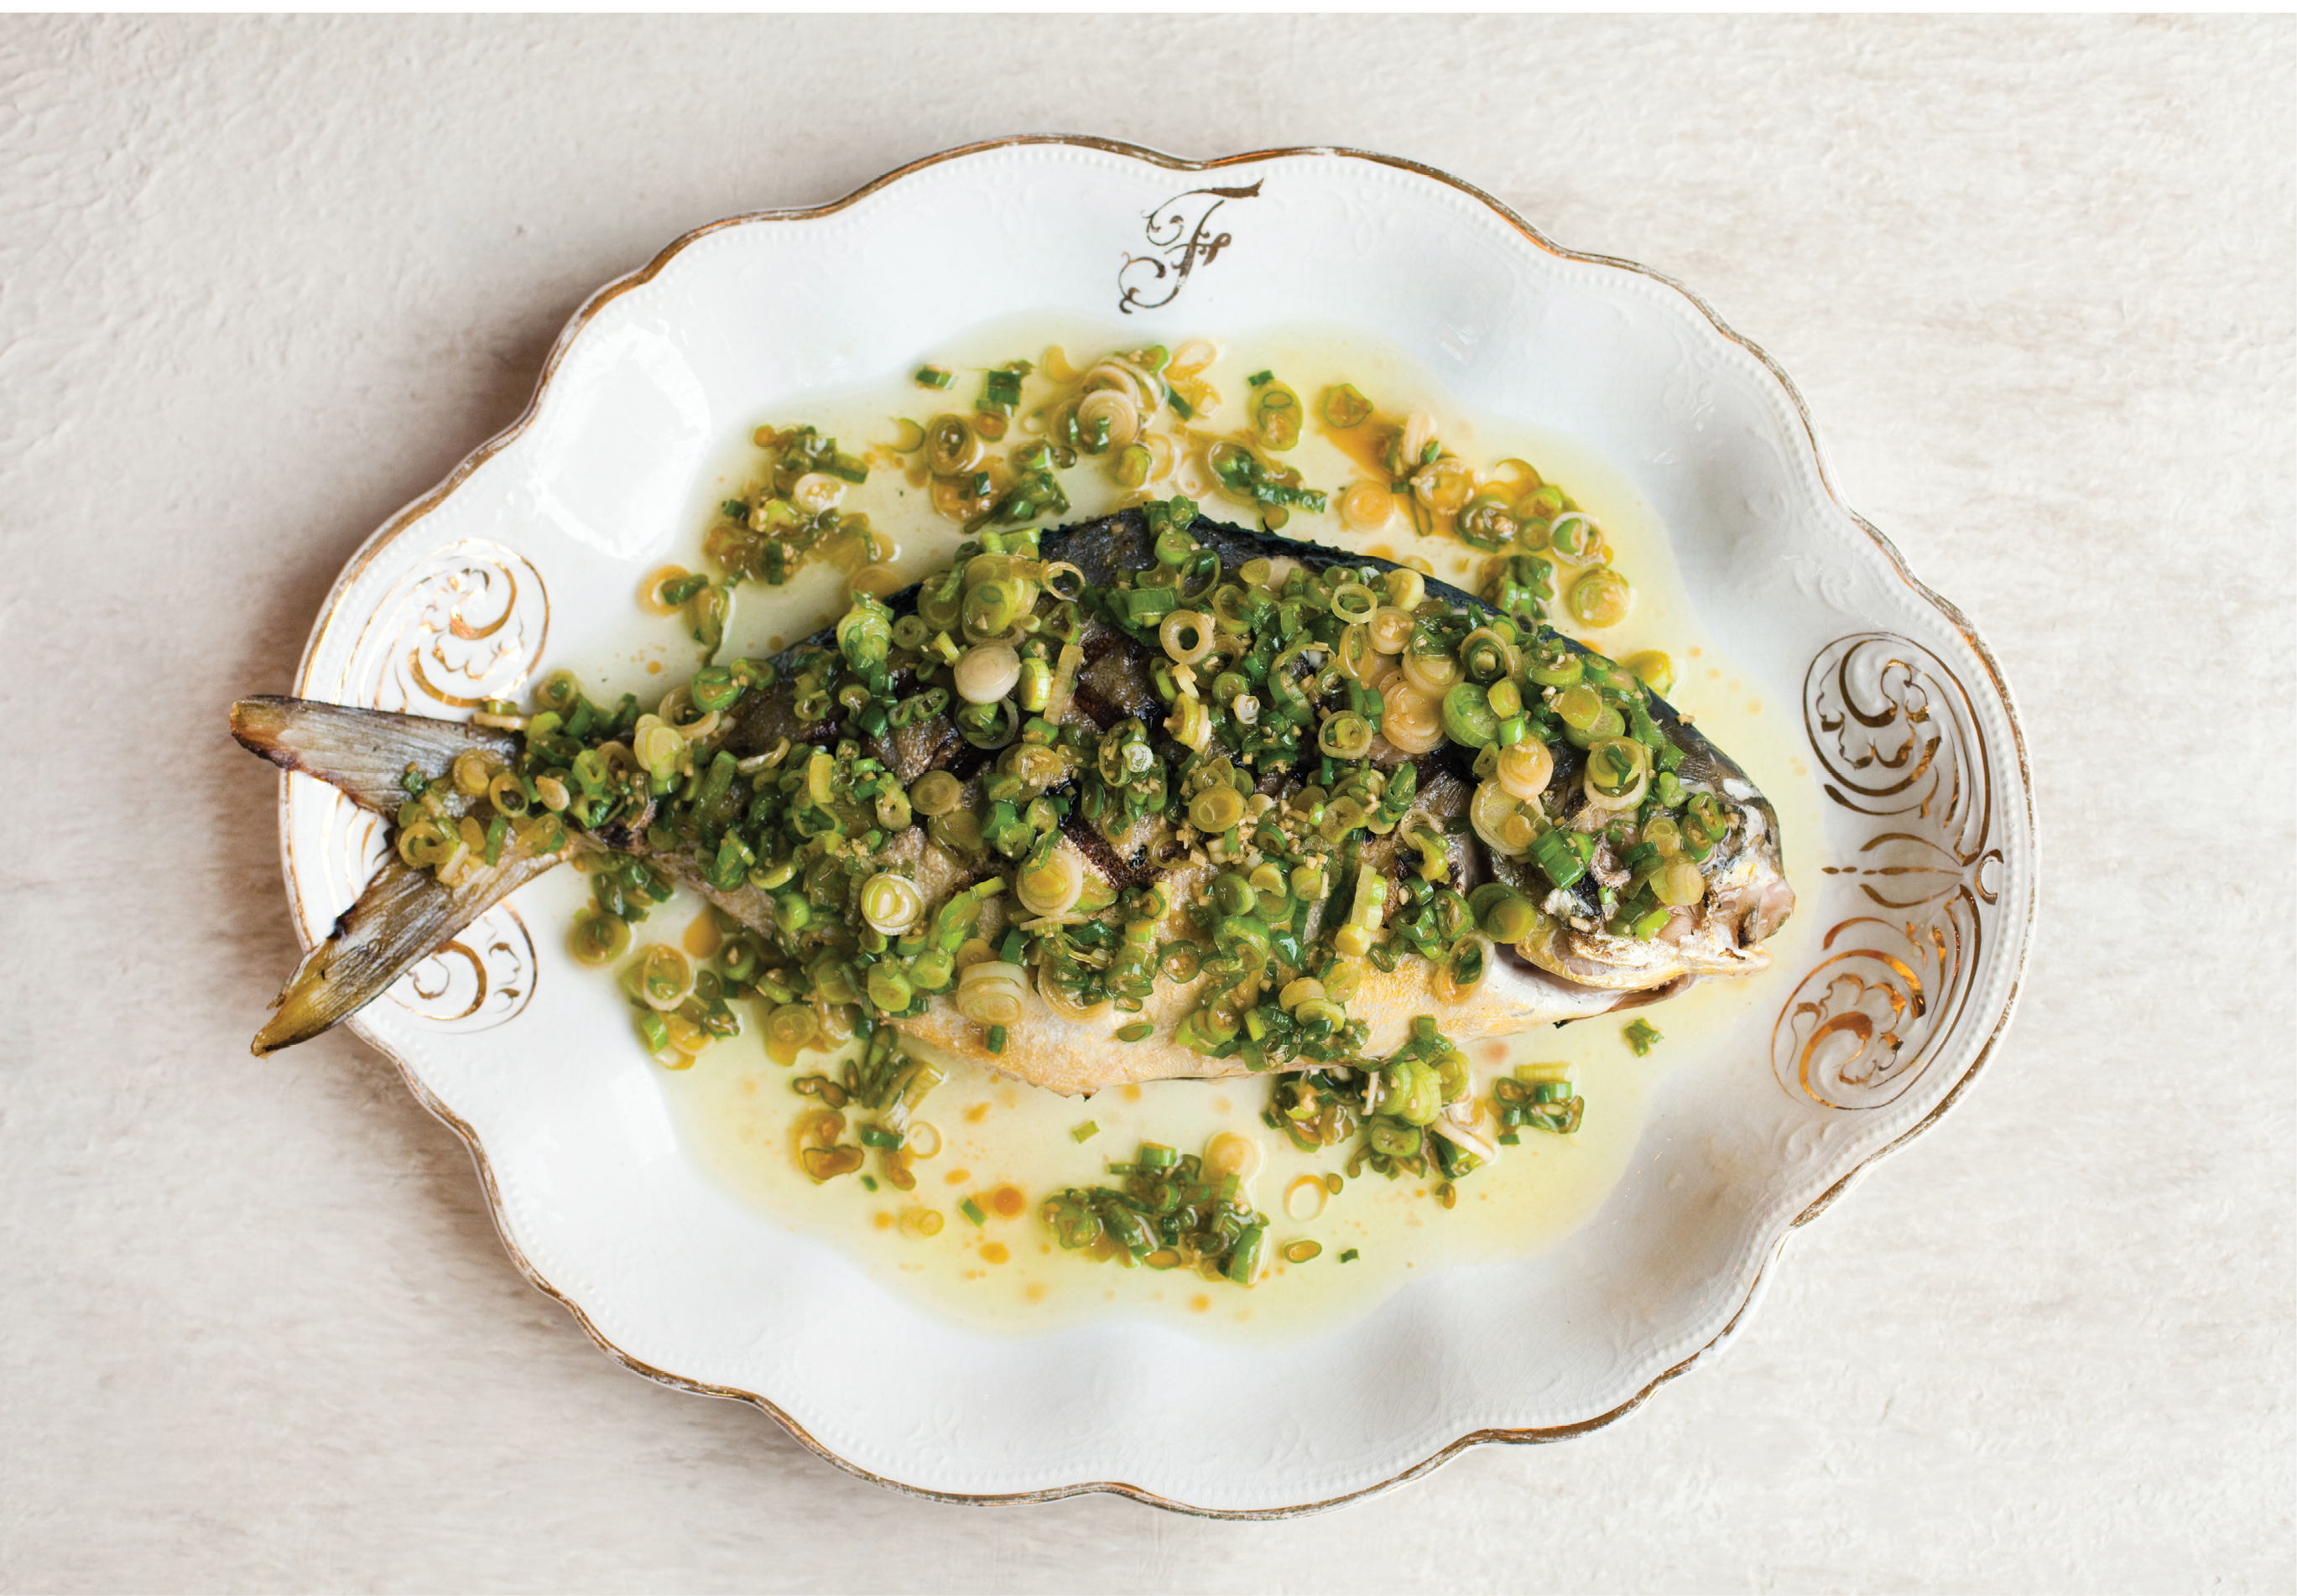 On the Menu: Marhefka’s catch determines the menus at many top local restaurants: grilled pompano with ginger-scallion sauce at Chubby Fish